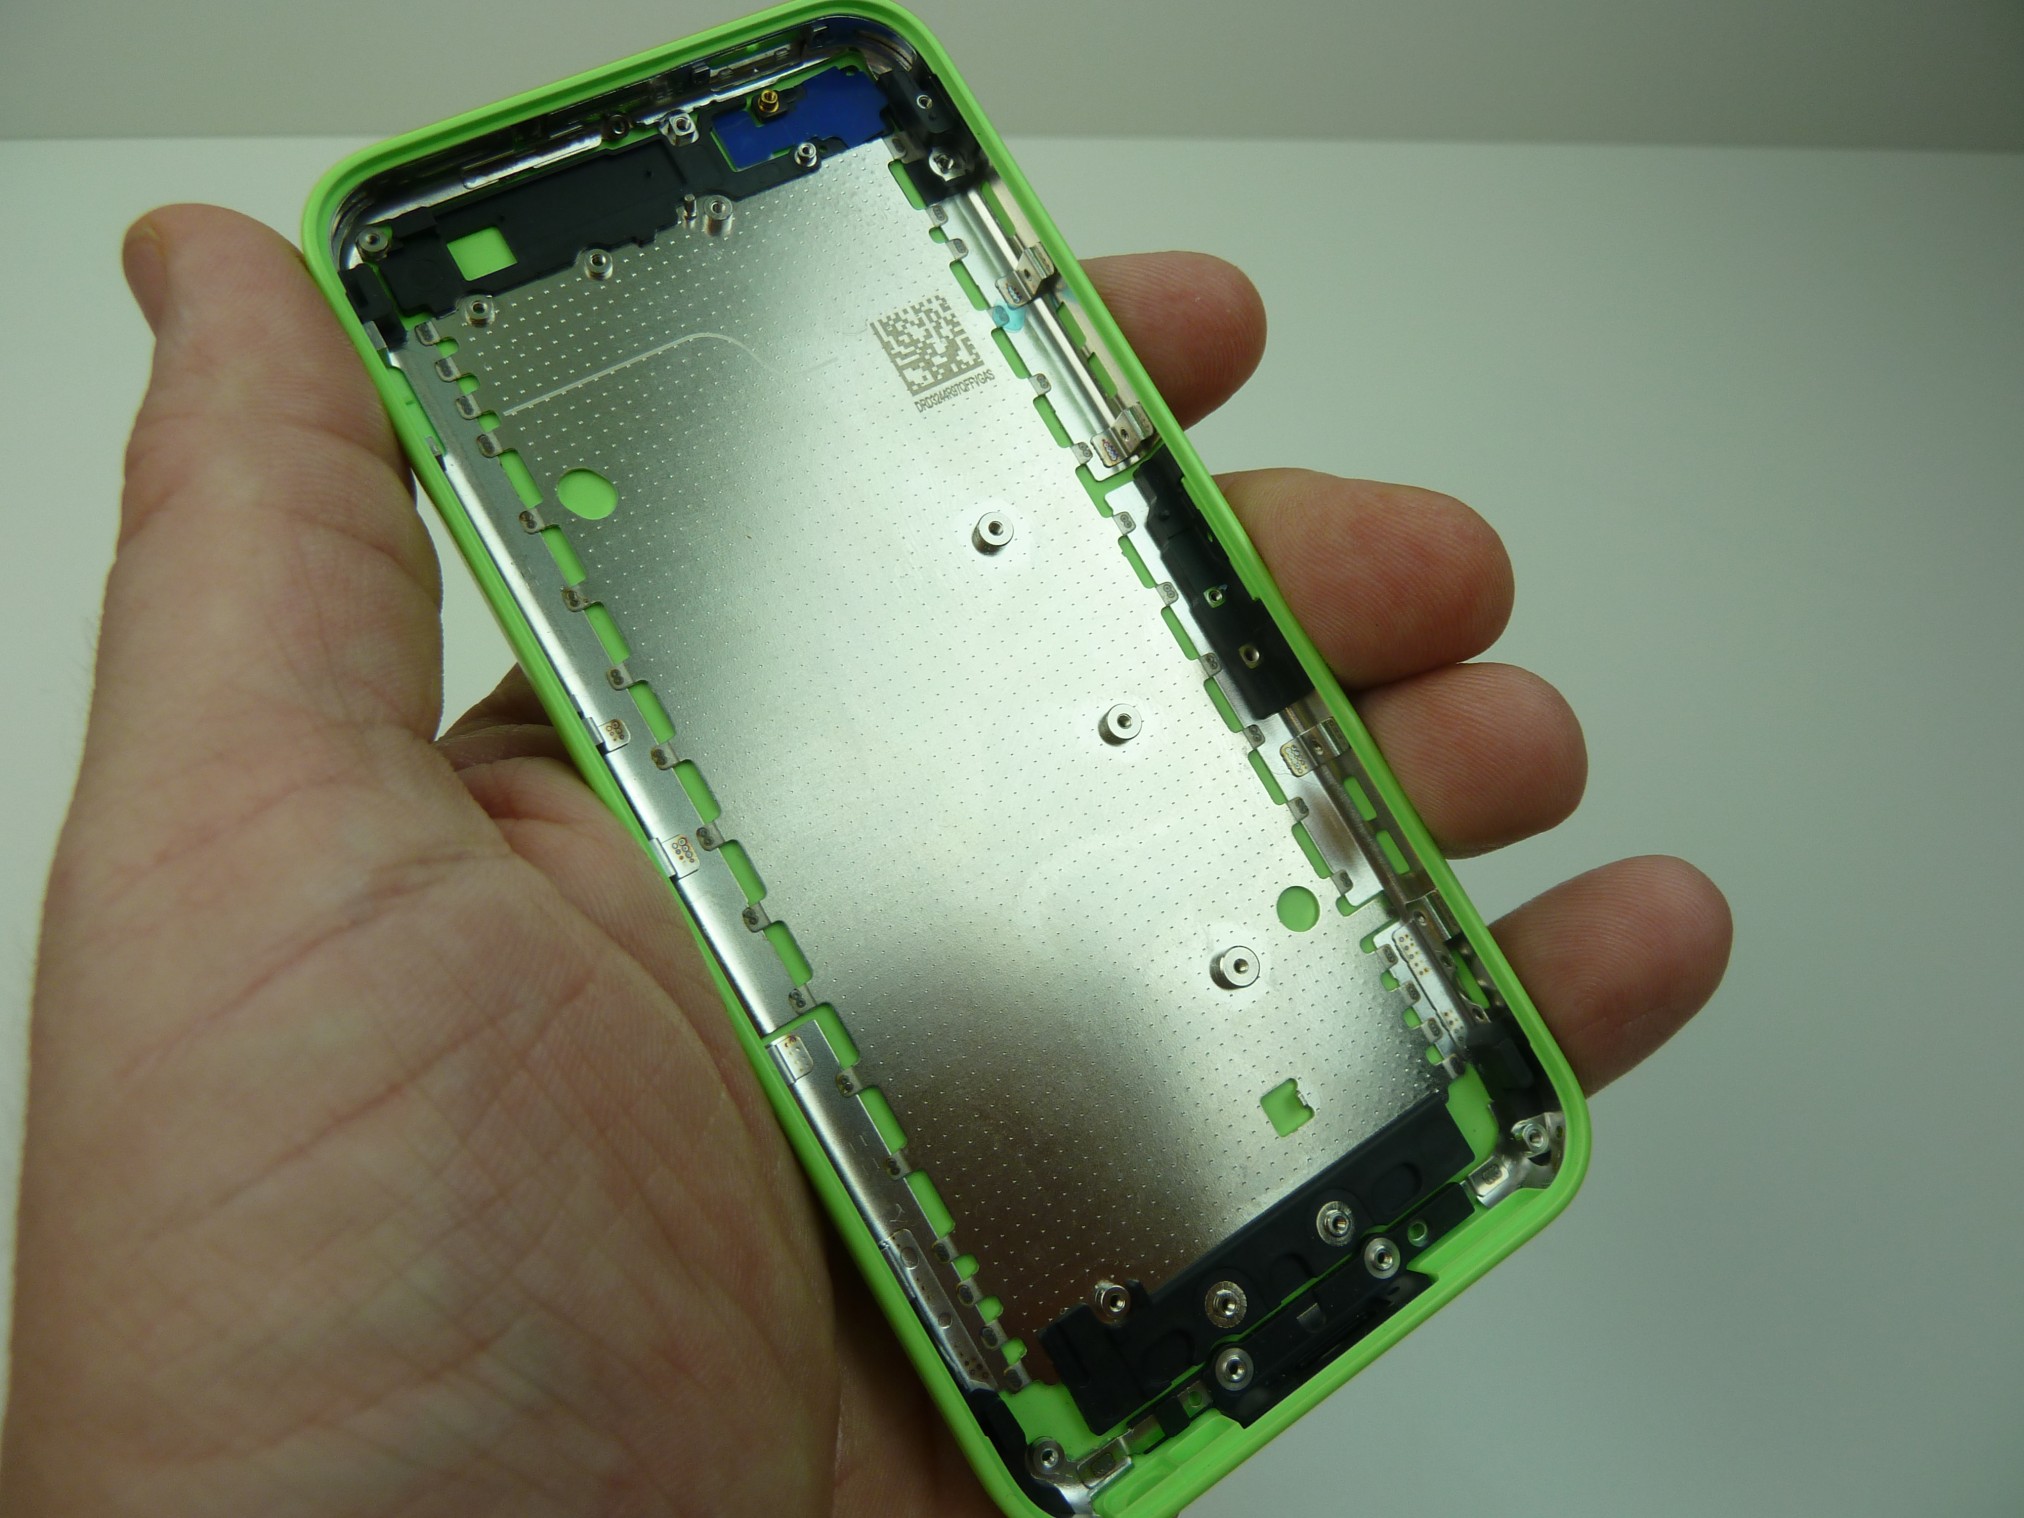 Gigaom | Leaked images show a lime green Apple iPhone 5C